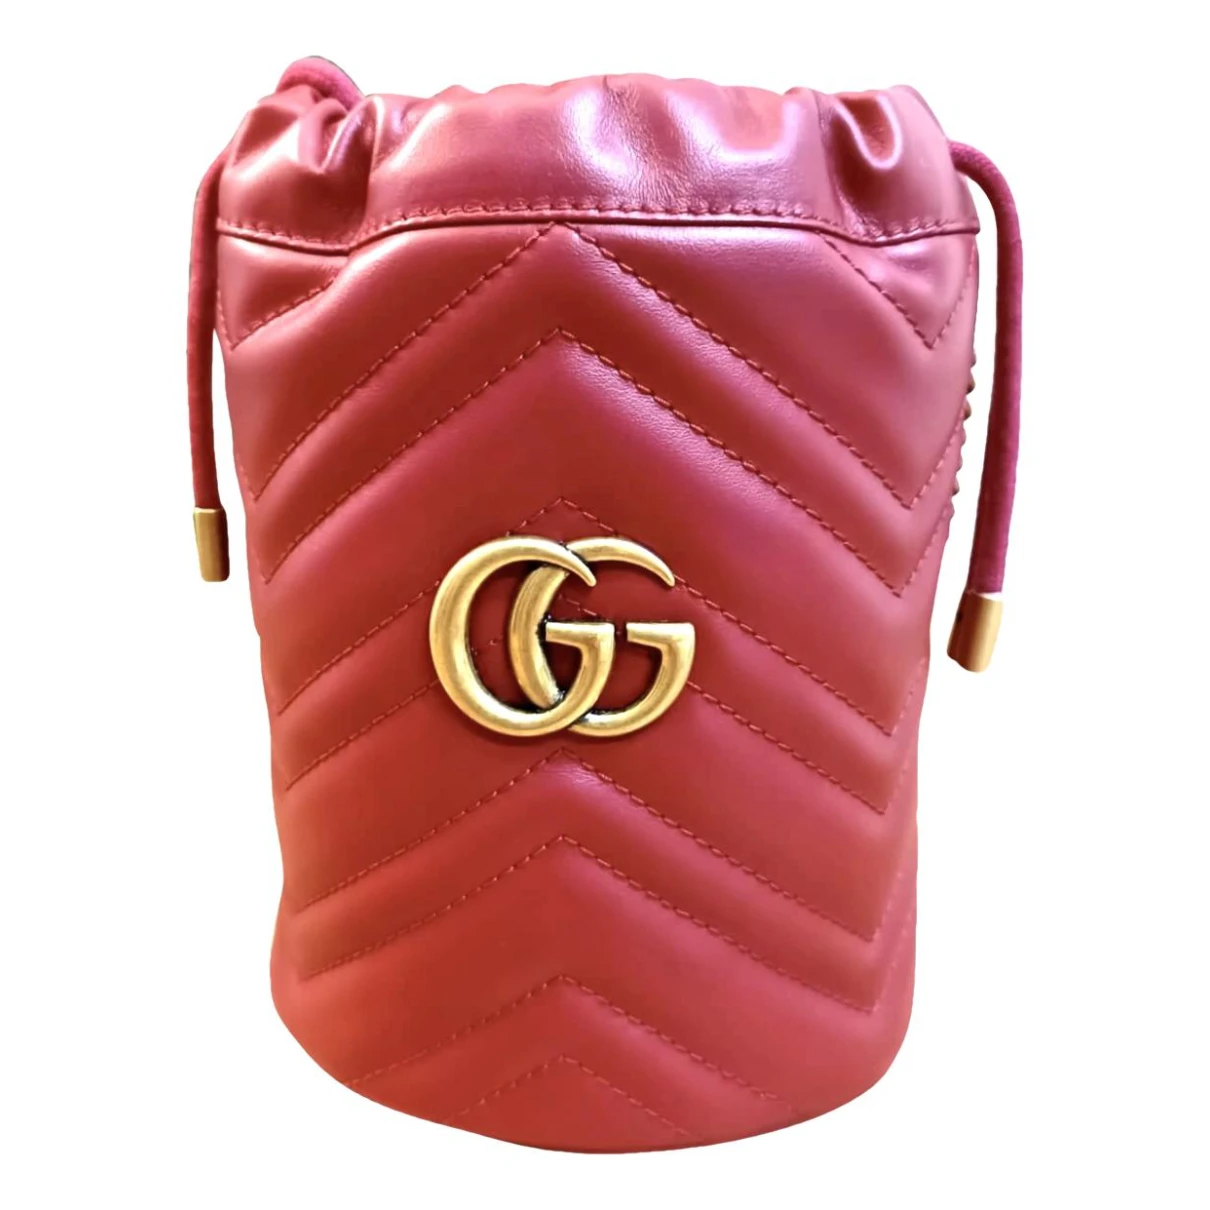 Pre-owned Gucci Gg Marmont Chain Bucket Leather Crossbody Bag In Red